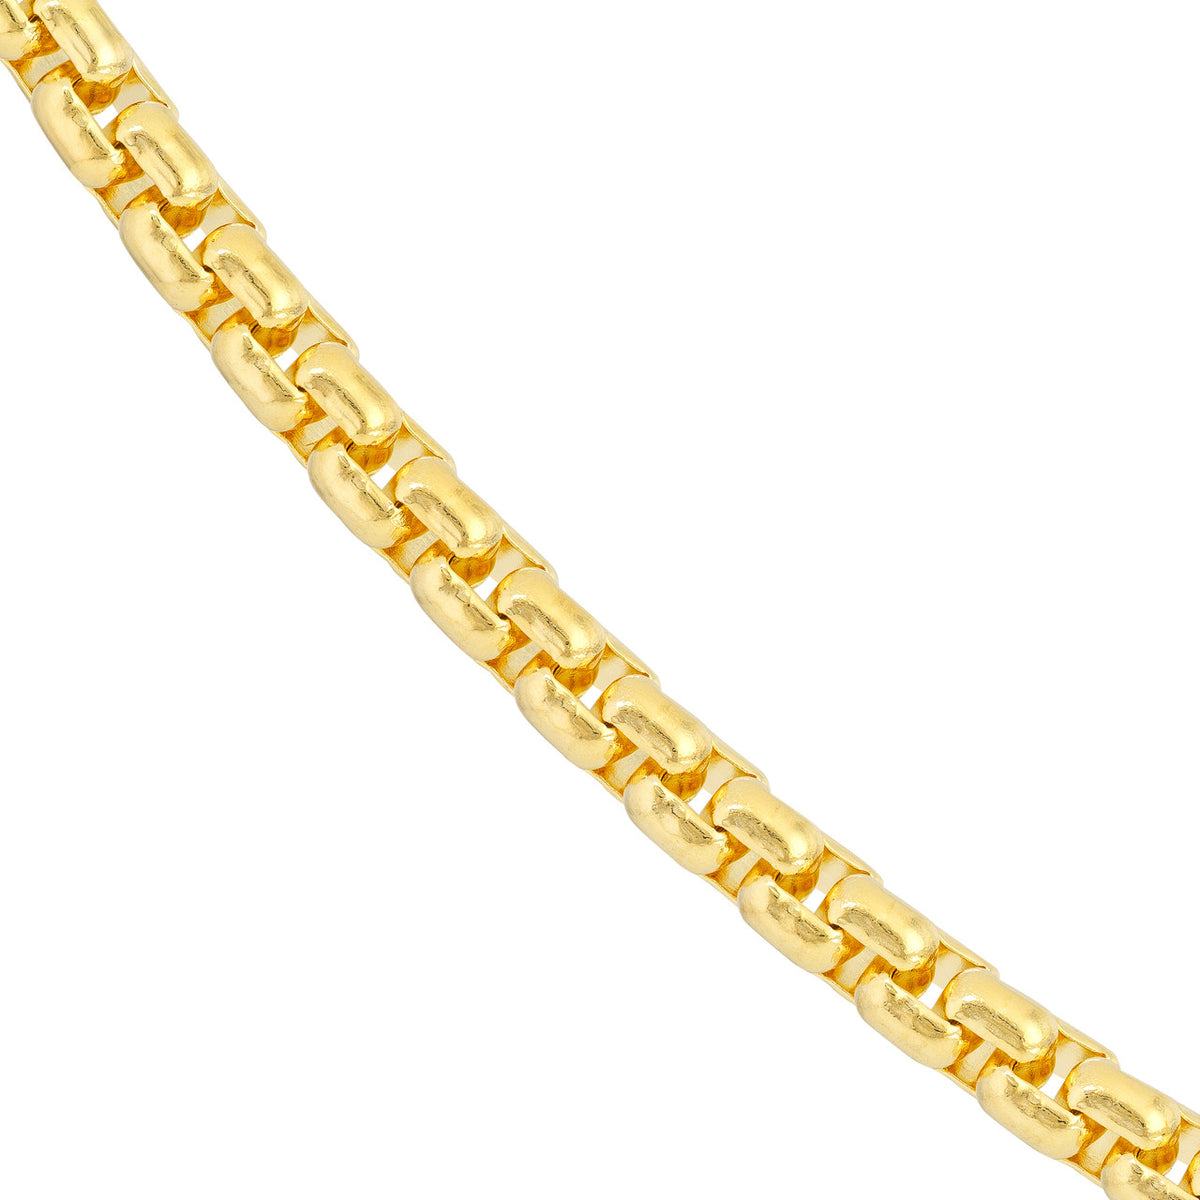 Solid 14K Gold 4.95mm Solid Round Box Chain Necklace with Lobster Lock